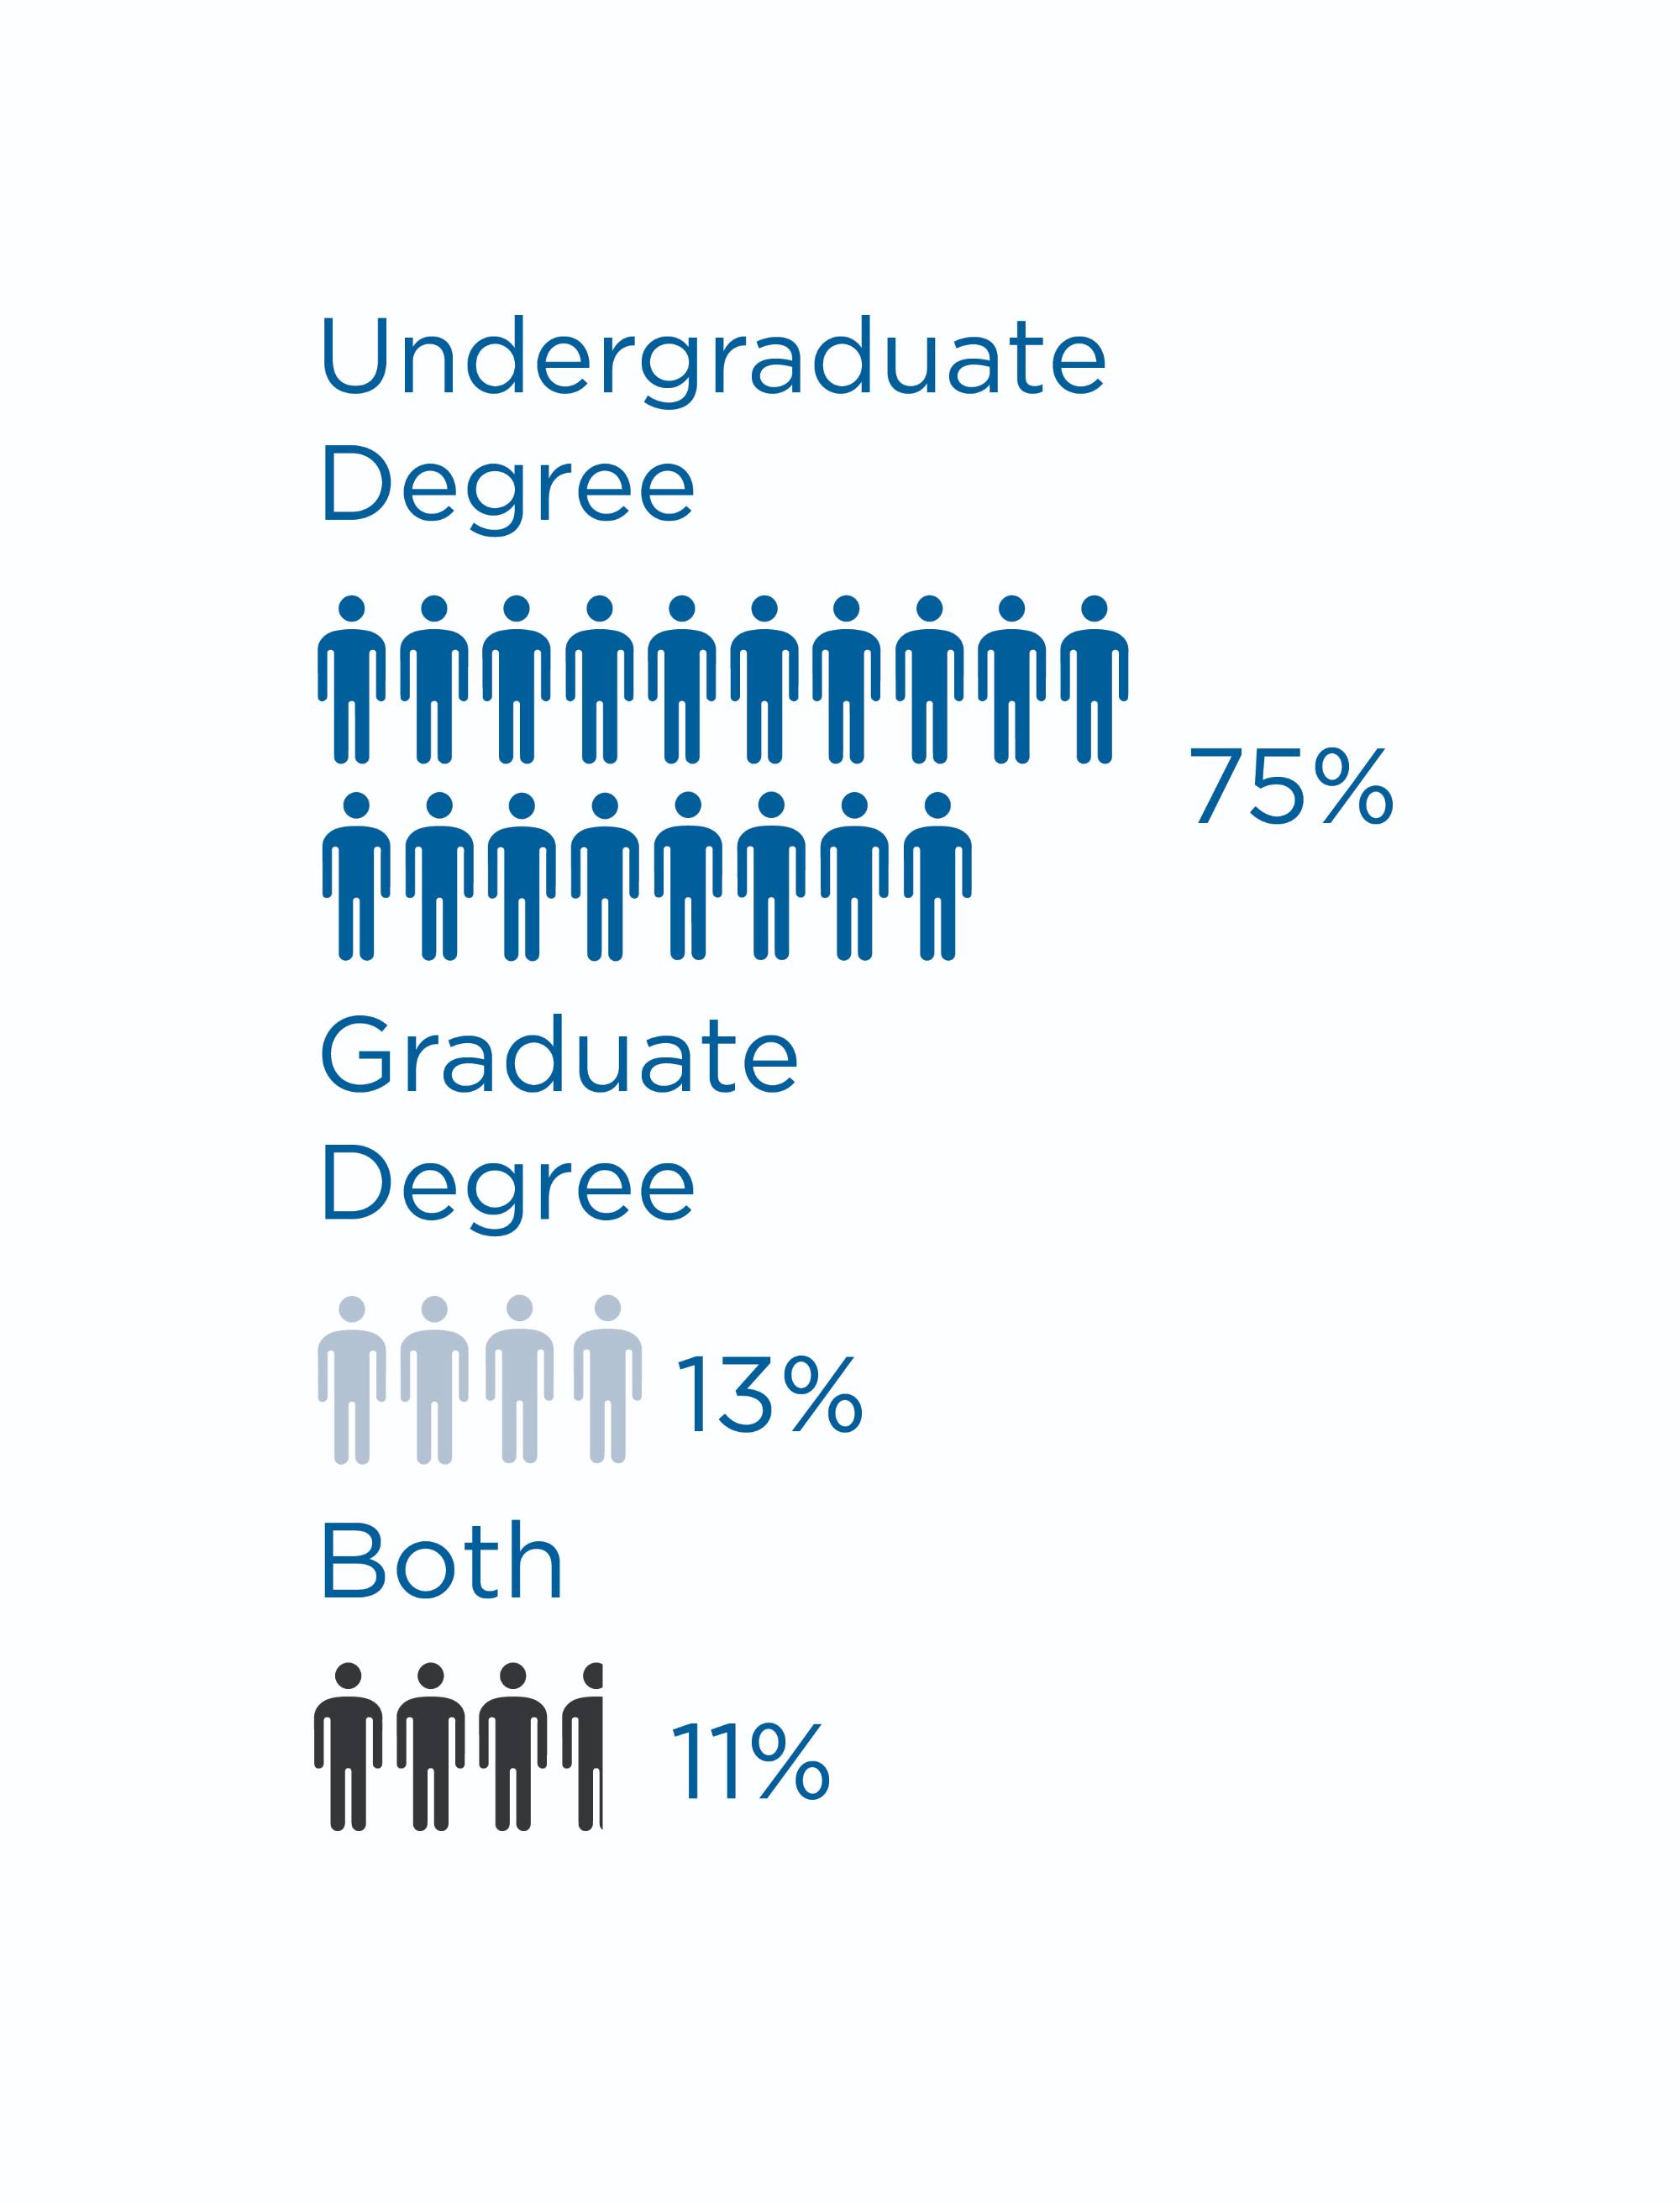 A graphic showing that 75% of respondents had an Undergraduate Degree, 13% had a Graduate Degree, and 11% had both.